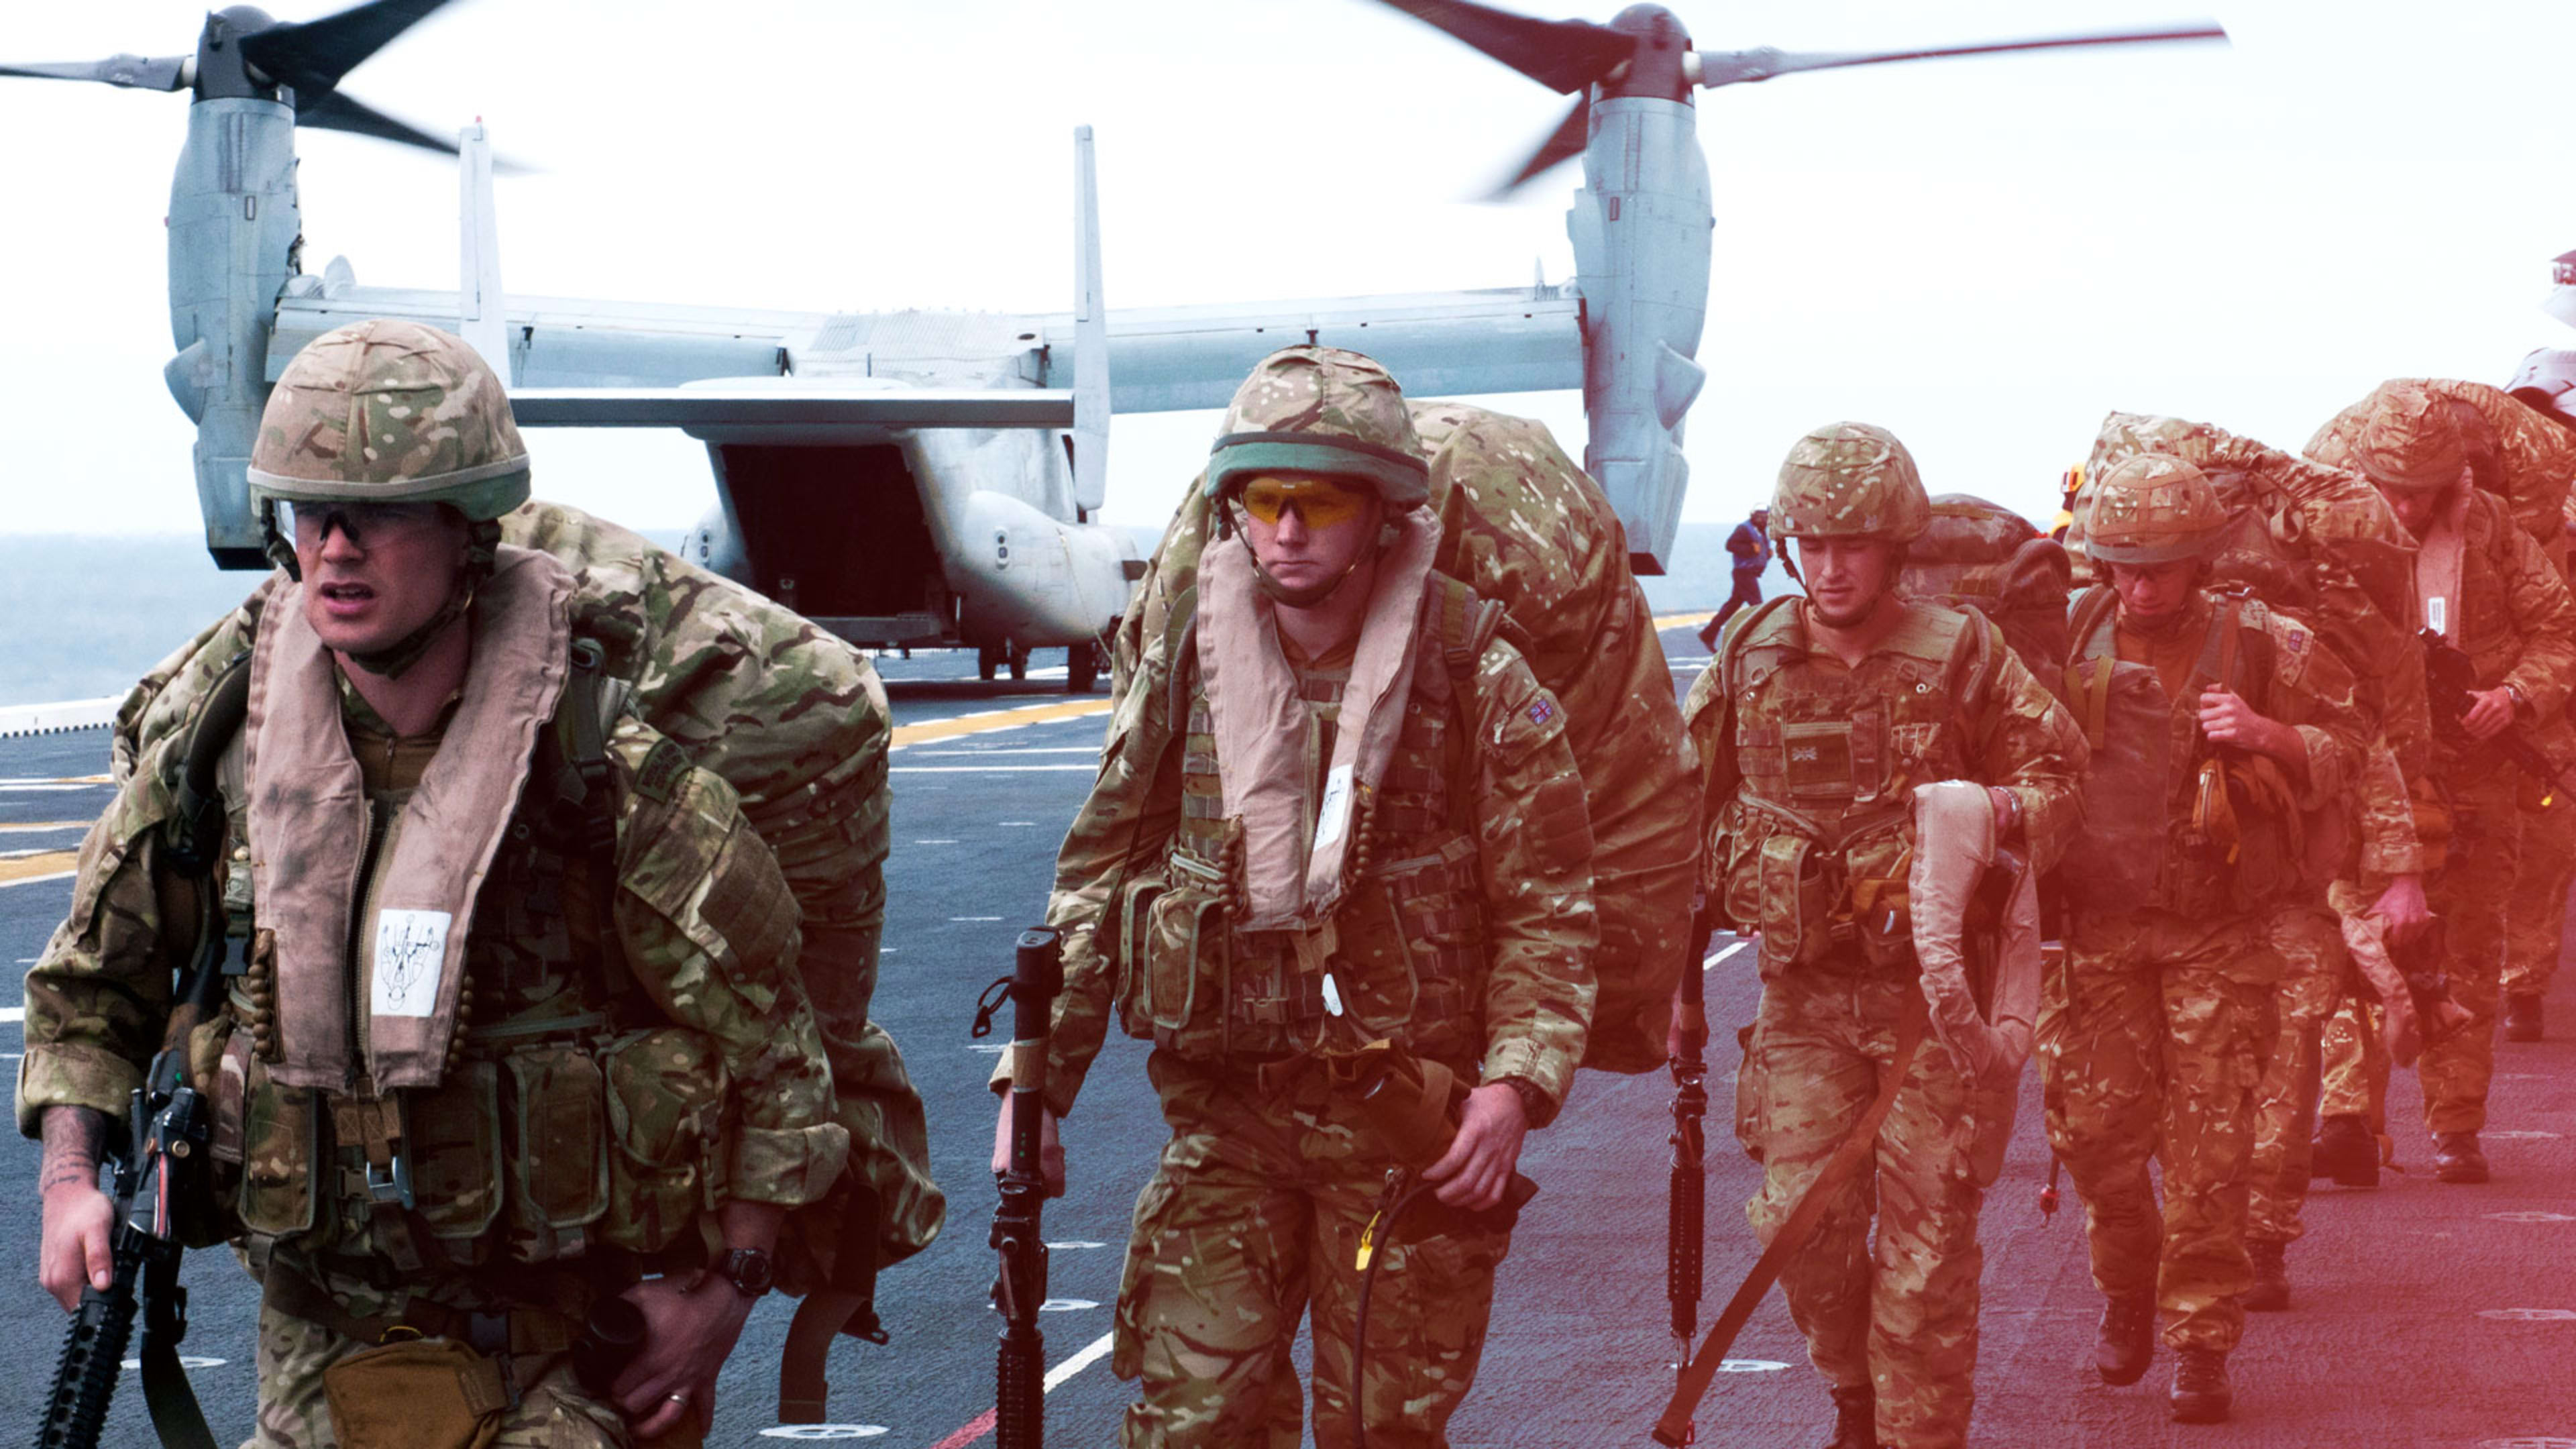 A Royal Marines vet’s tips for teams performing under pressure